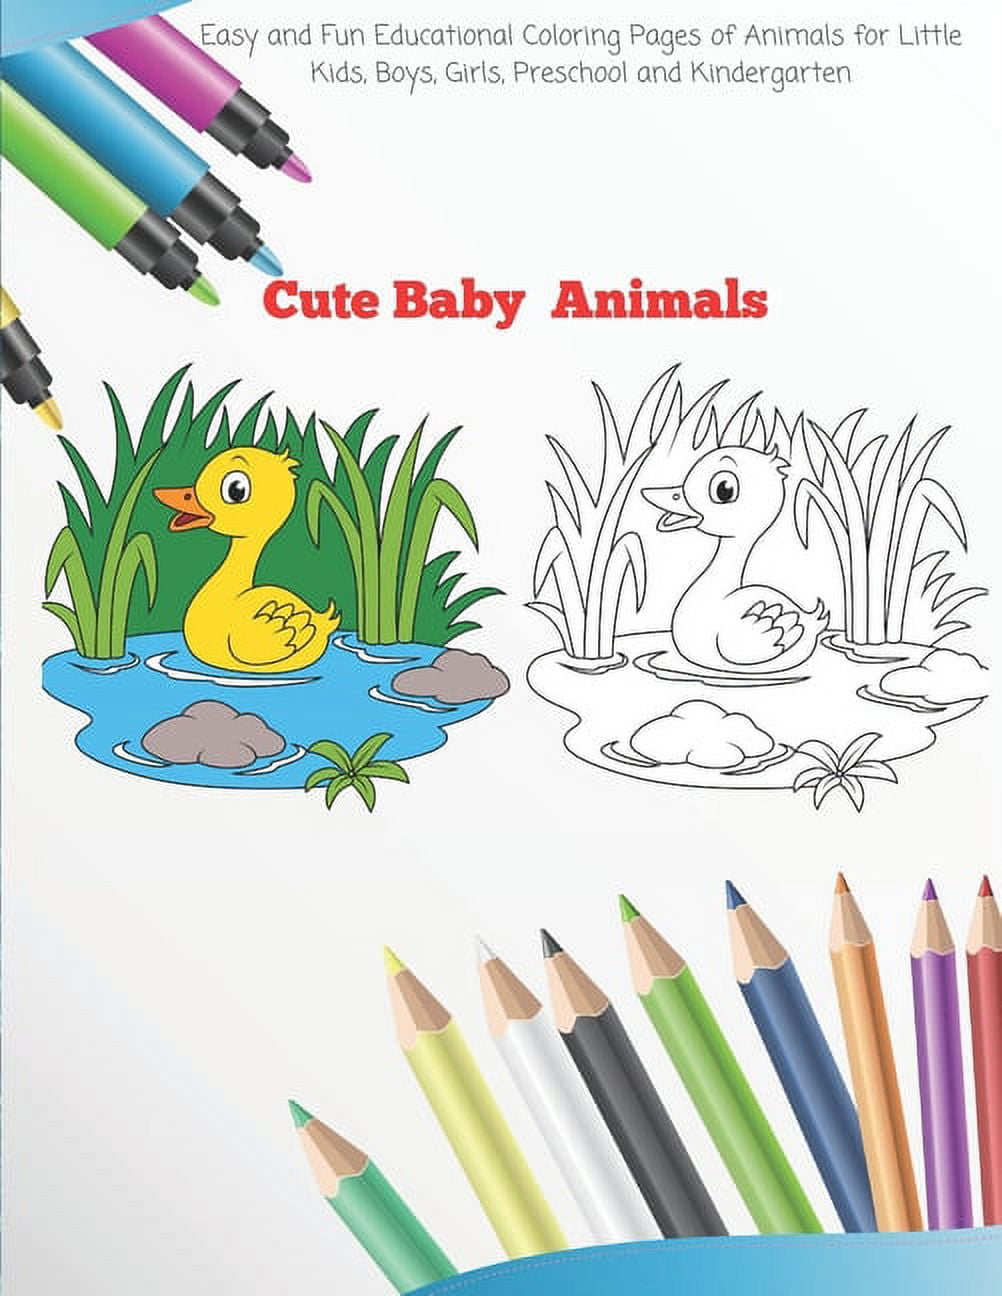 Coloring Books For Children Ages 4-6: Easy Funny Learning for First  Preschools and Toddlers from Animals Images by J.K. Mimo, Paperback